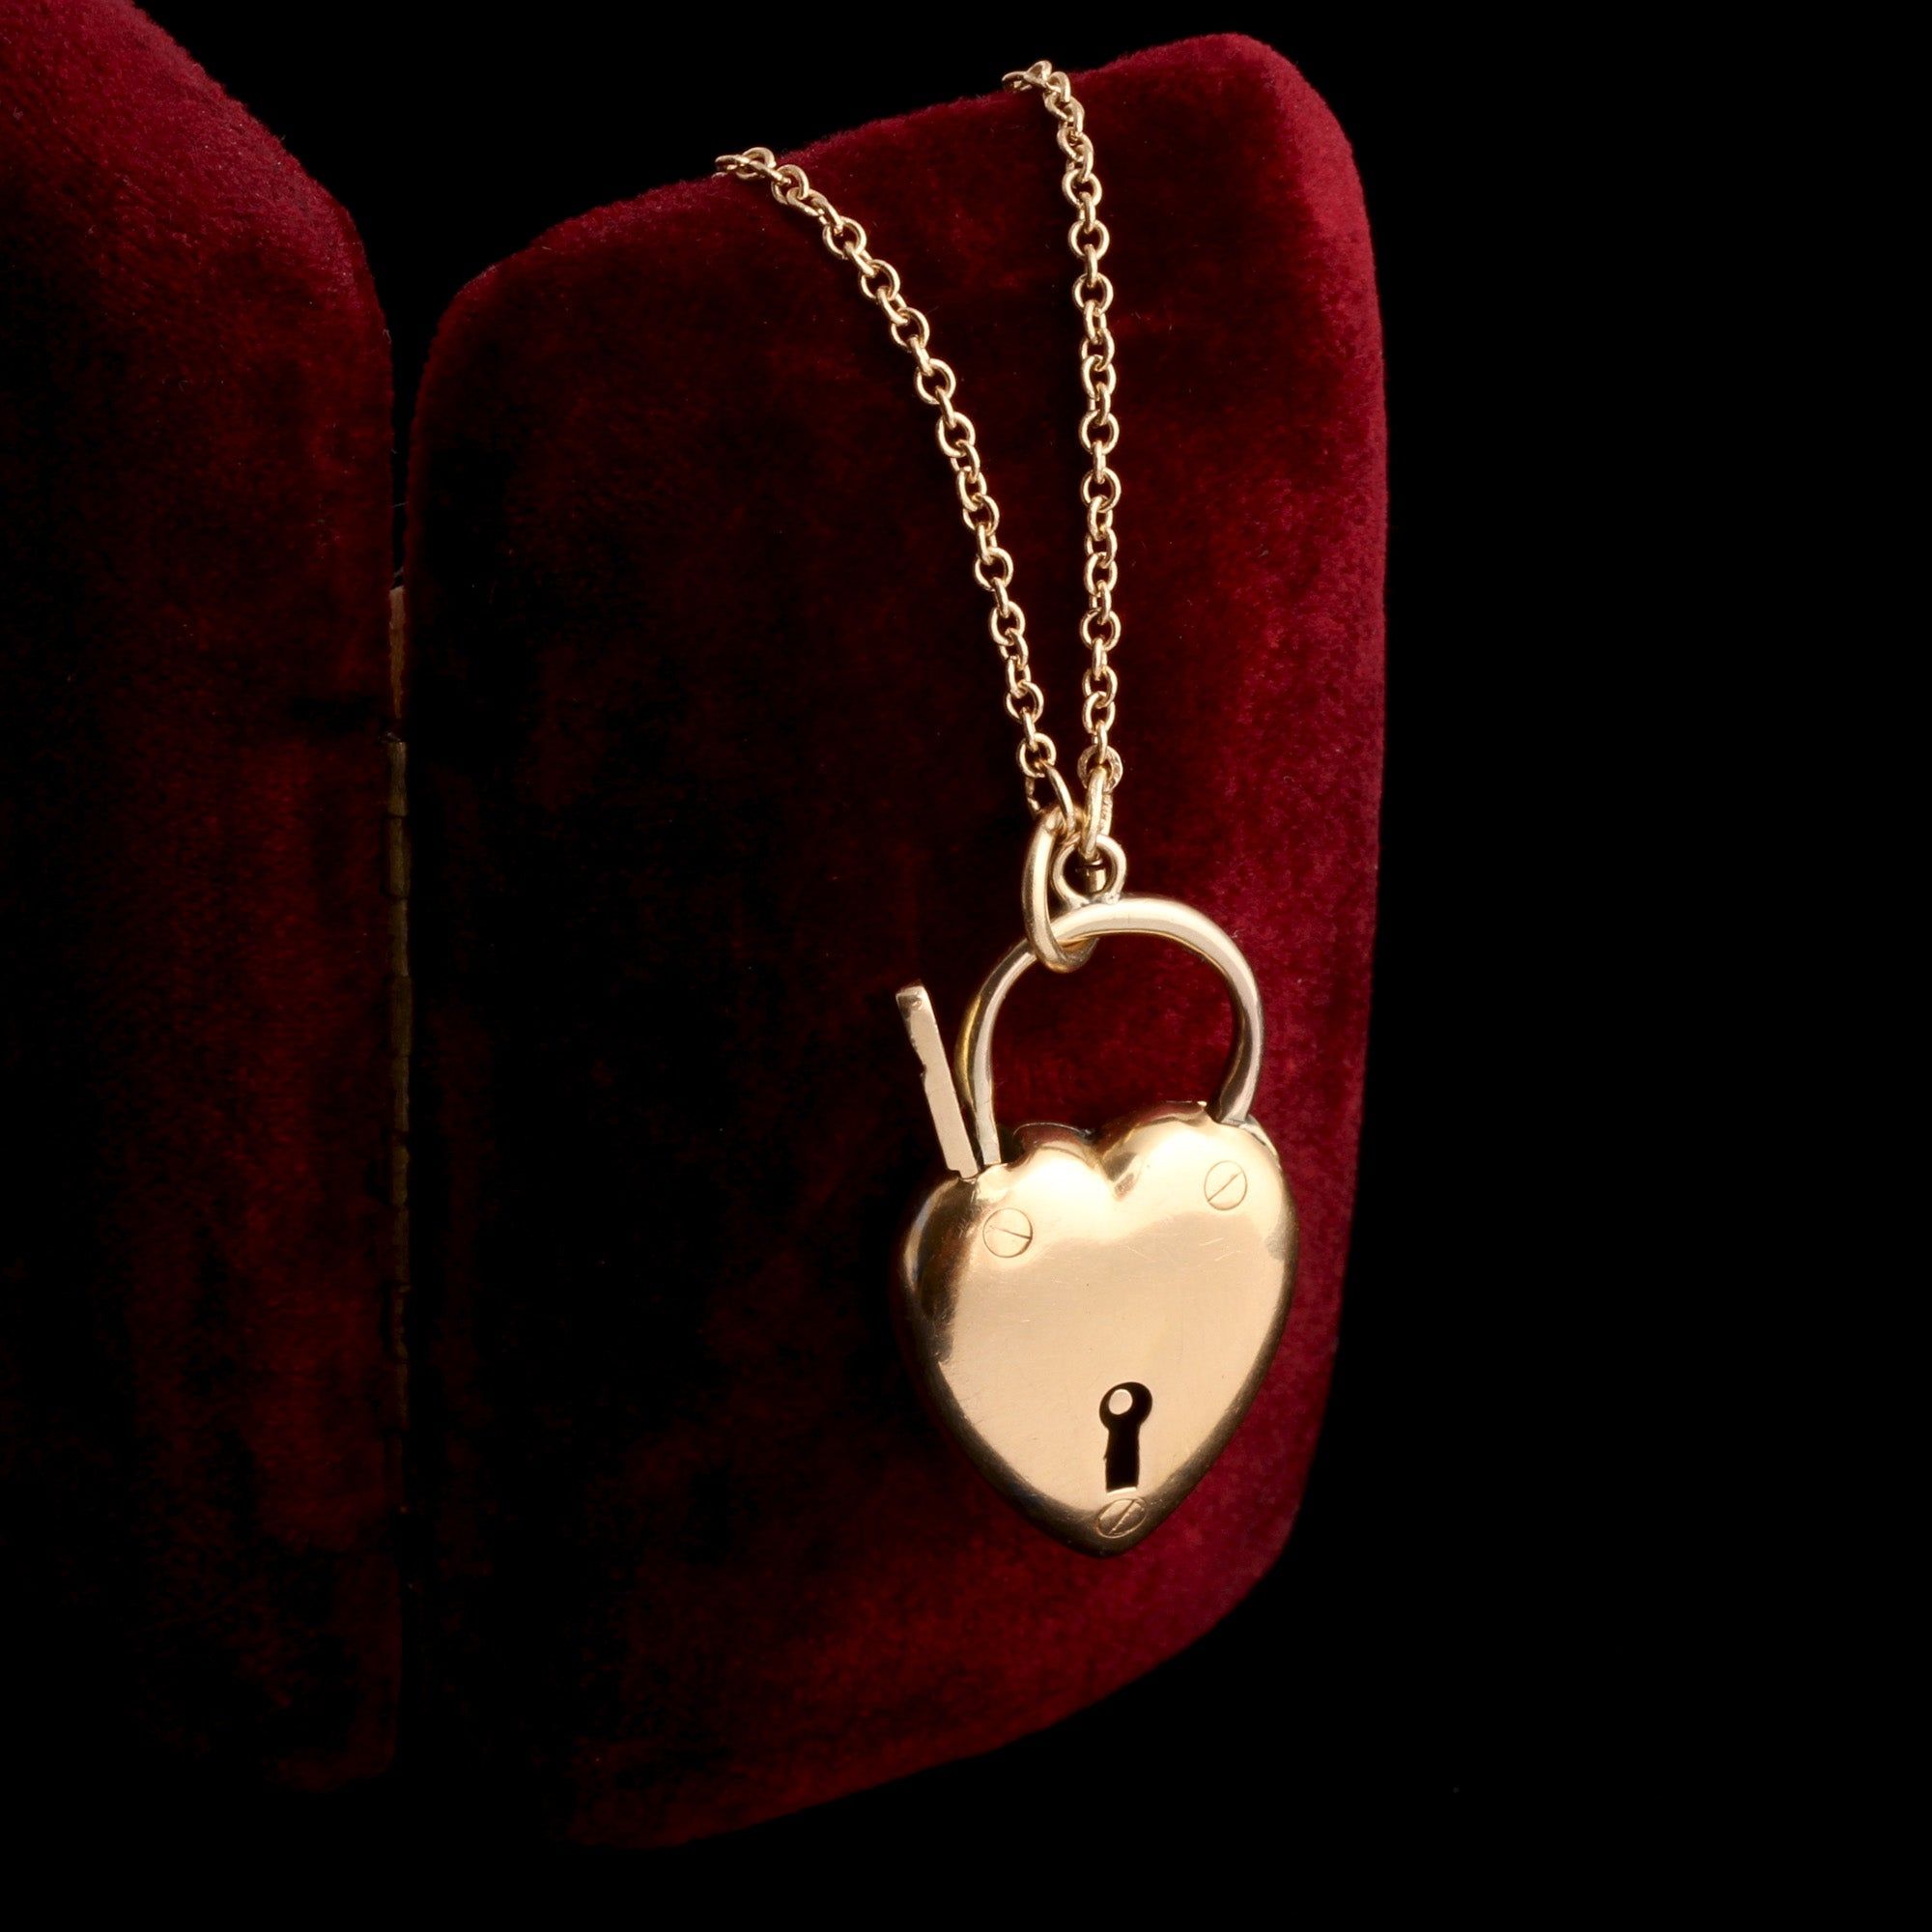 Chain Necklace with Heart Lock